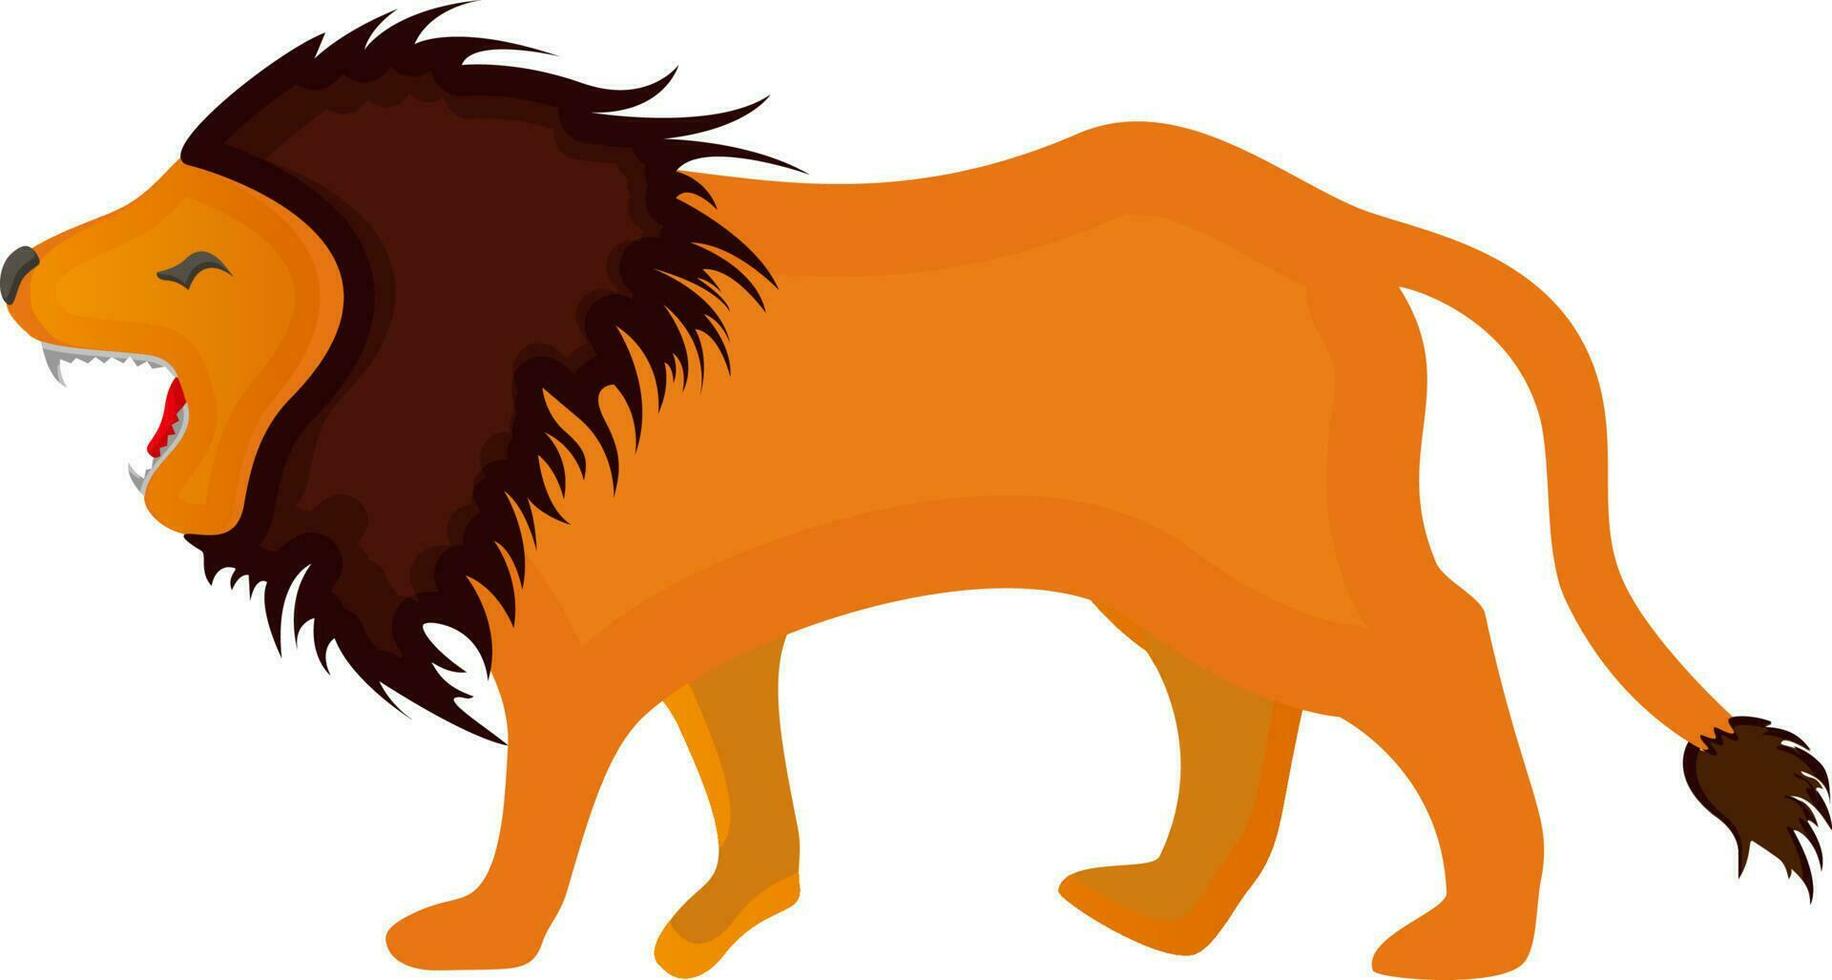 Animal character of lion. vector